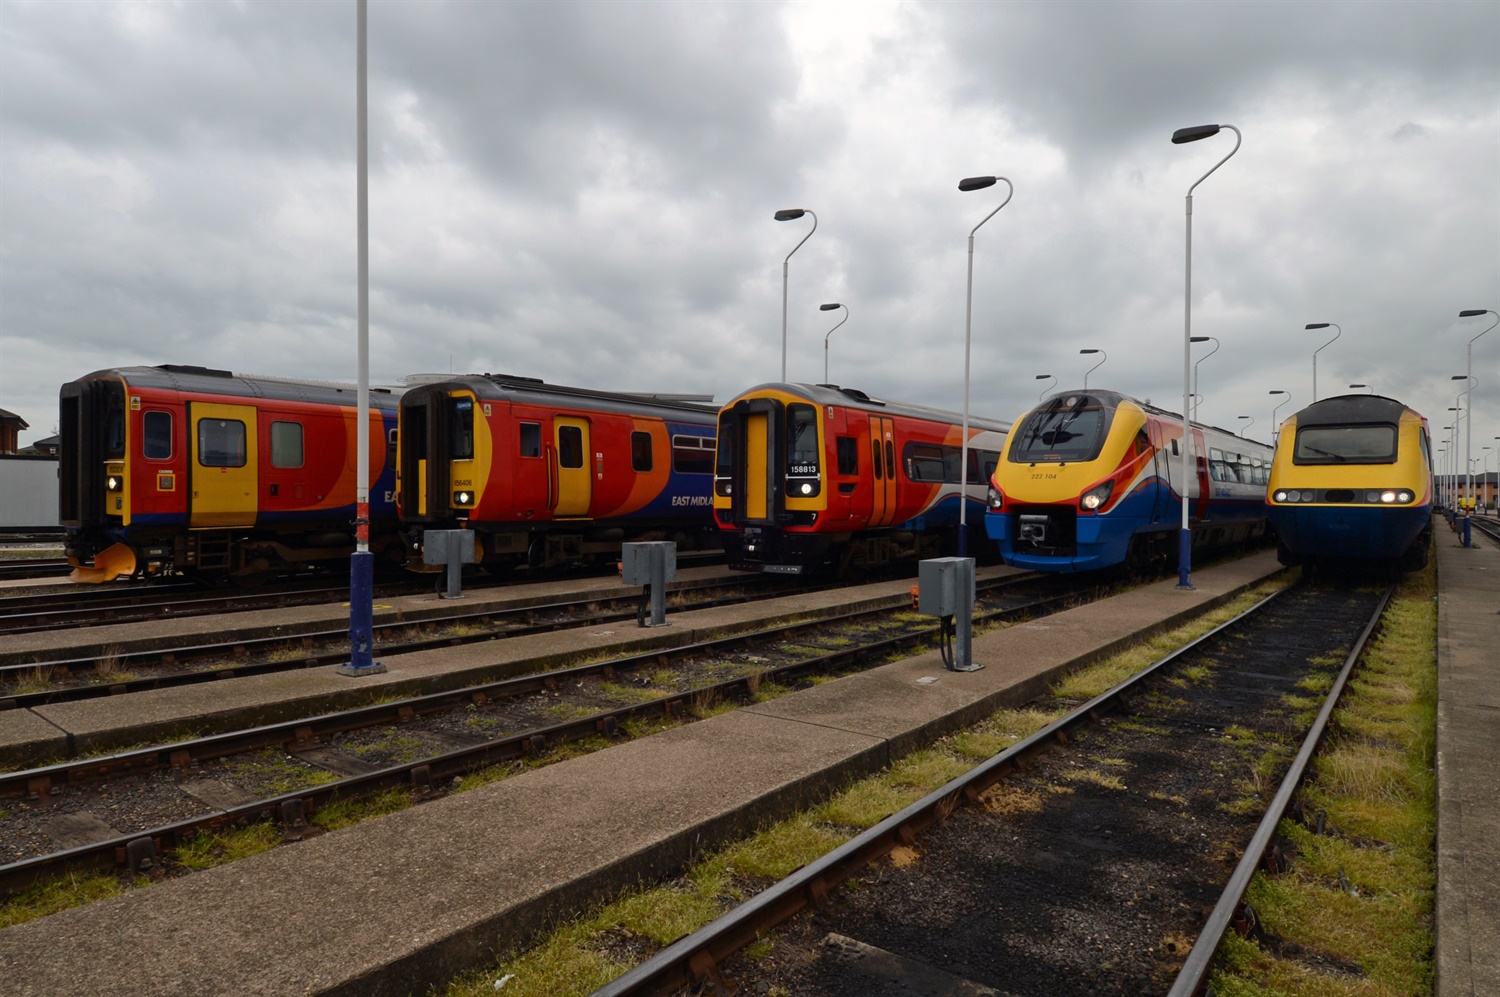 East Midlands Trains franchise extended to 2018 under £150m deal